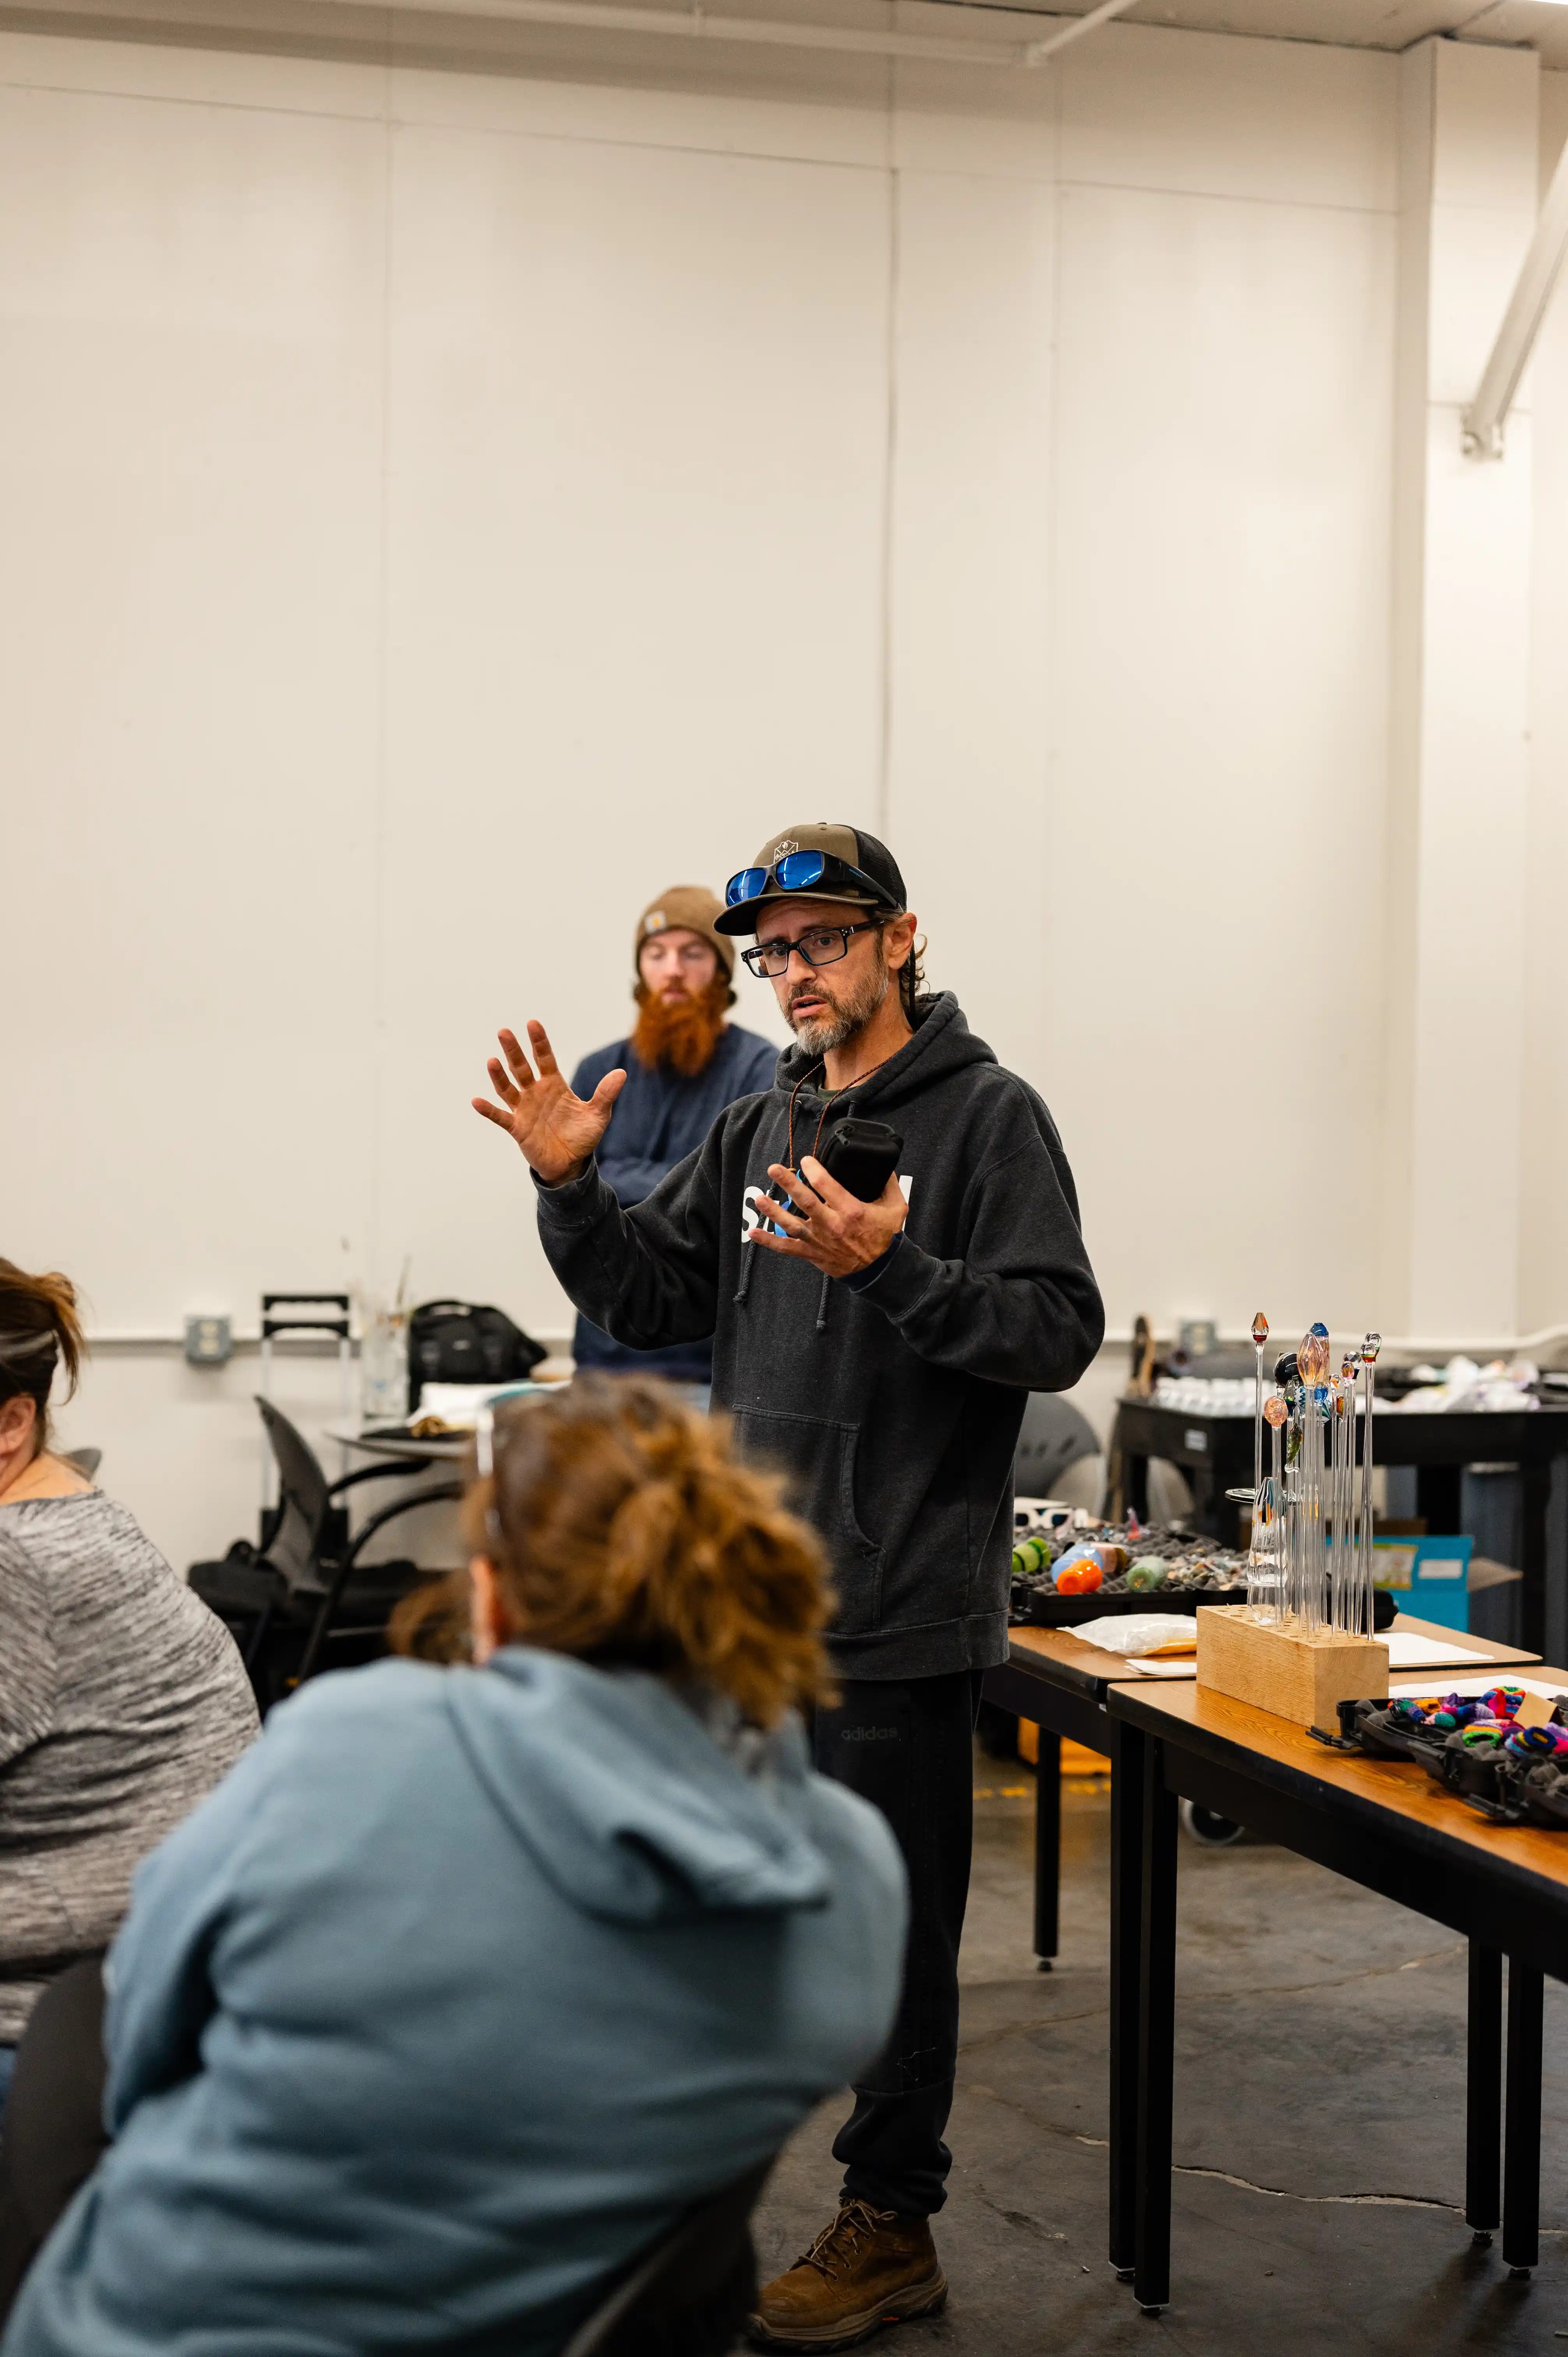 Instructor in glasses and cap gesturing while speaking in a workshop, with attentive students and workbench in foreground.